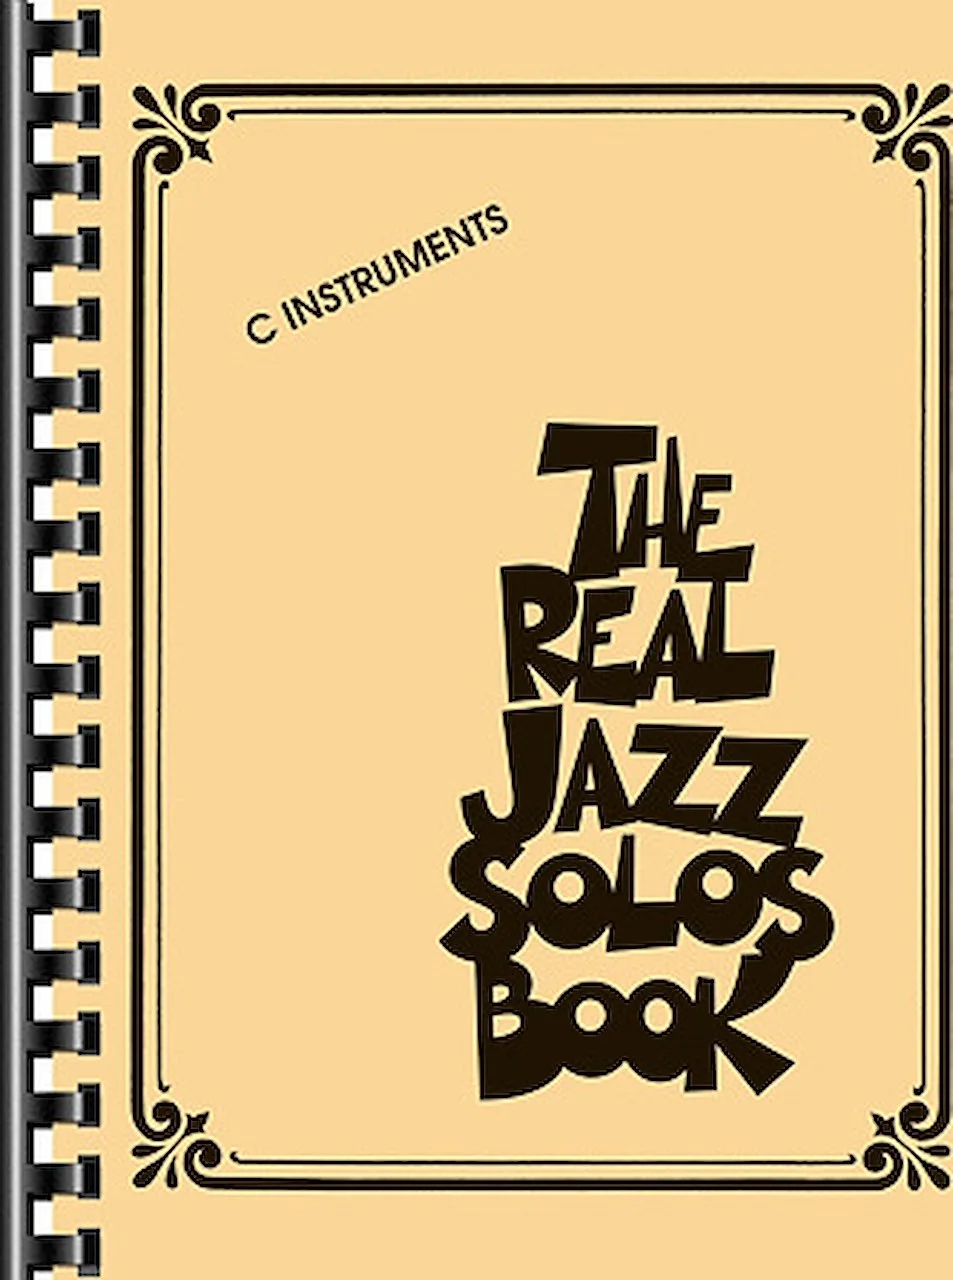 The Real Jazz Book - C Instruments 884088066512 | eBay